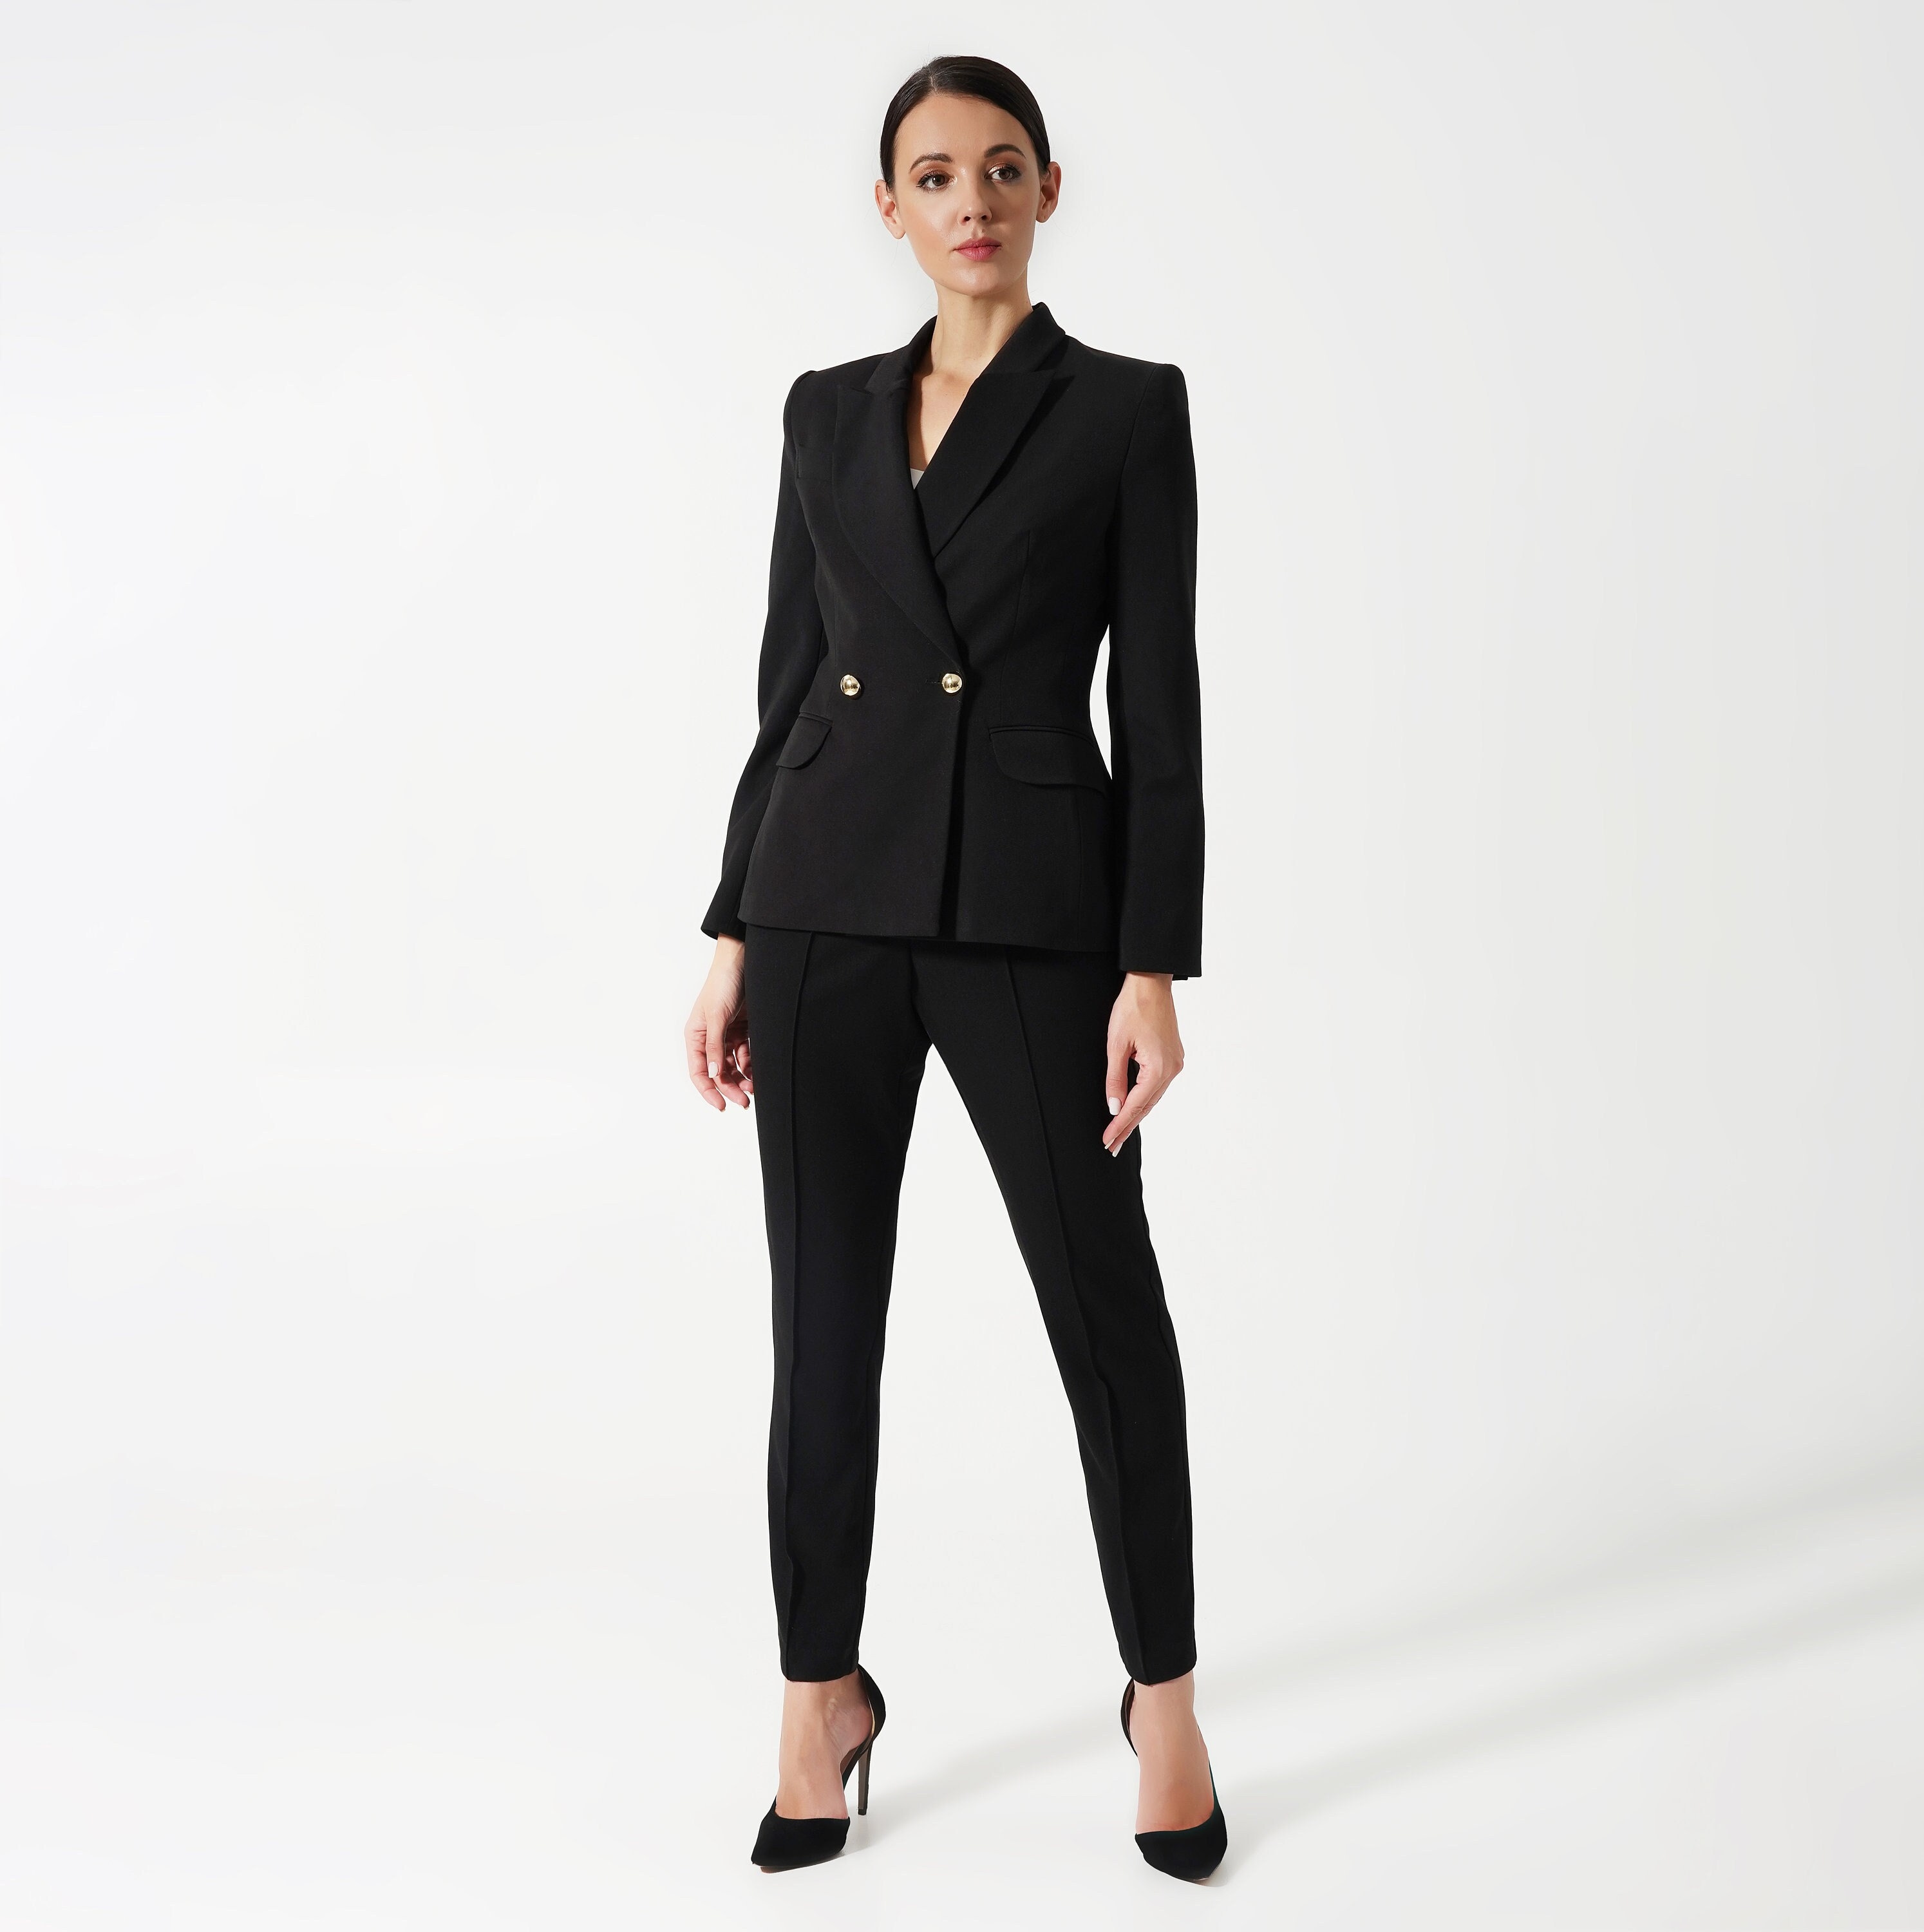 Black Pant Suit Women, Black Business Suit for Ladies, Classic Womens  Tuxedo Suit Jacket, Double Breasted Blazer and Pegged Pants TAVROVSKA -   Finland